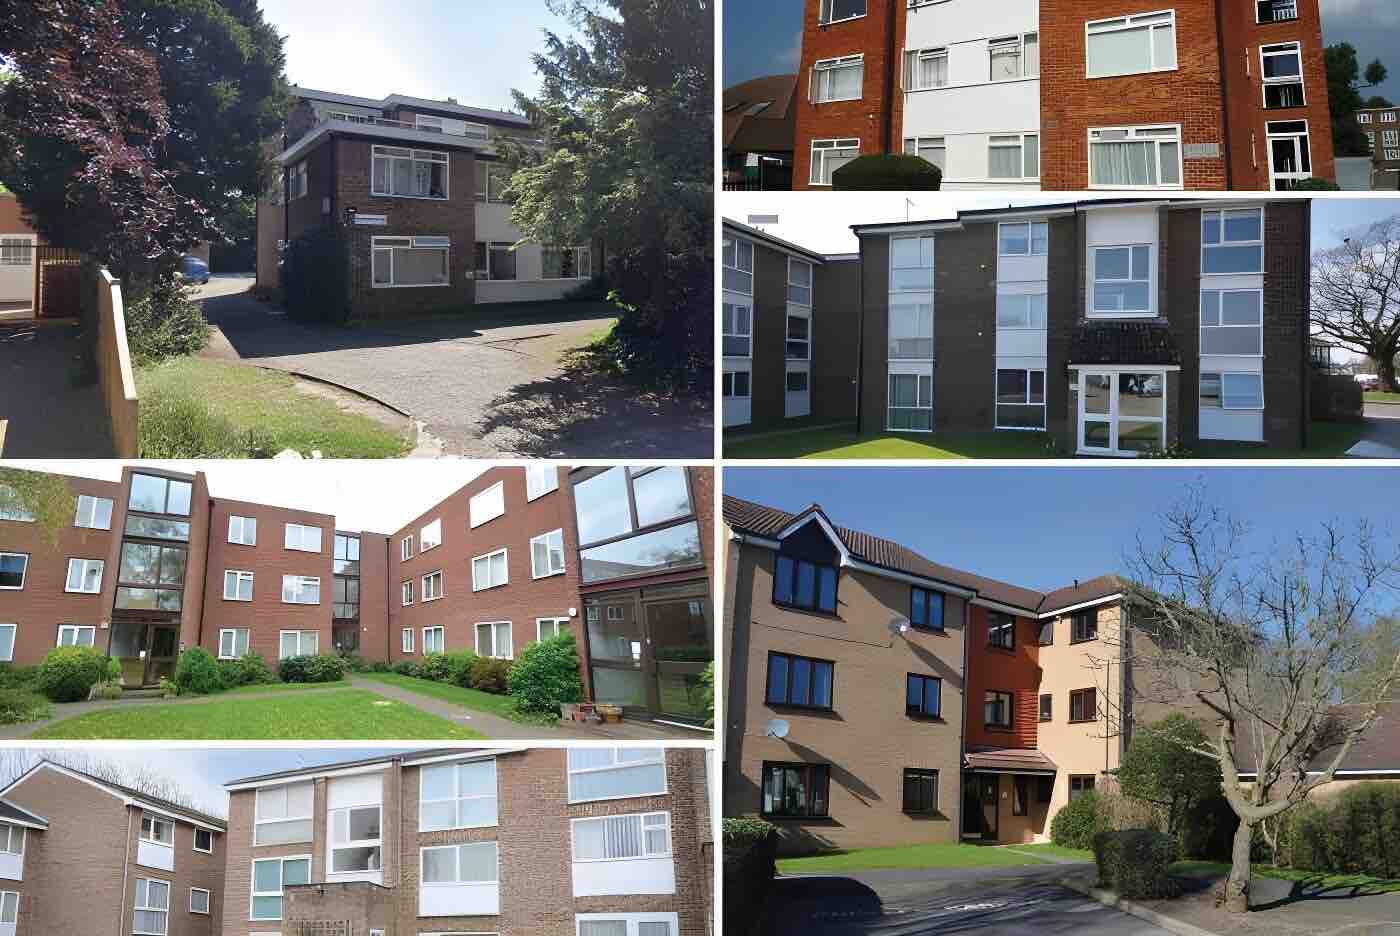 Residential Portfolio of Six Buildings Acquired